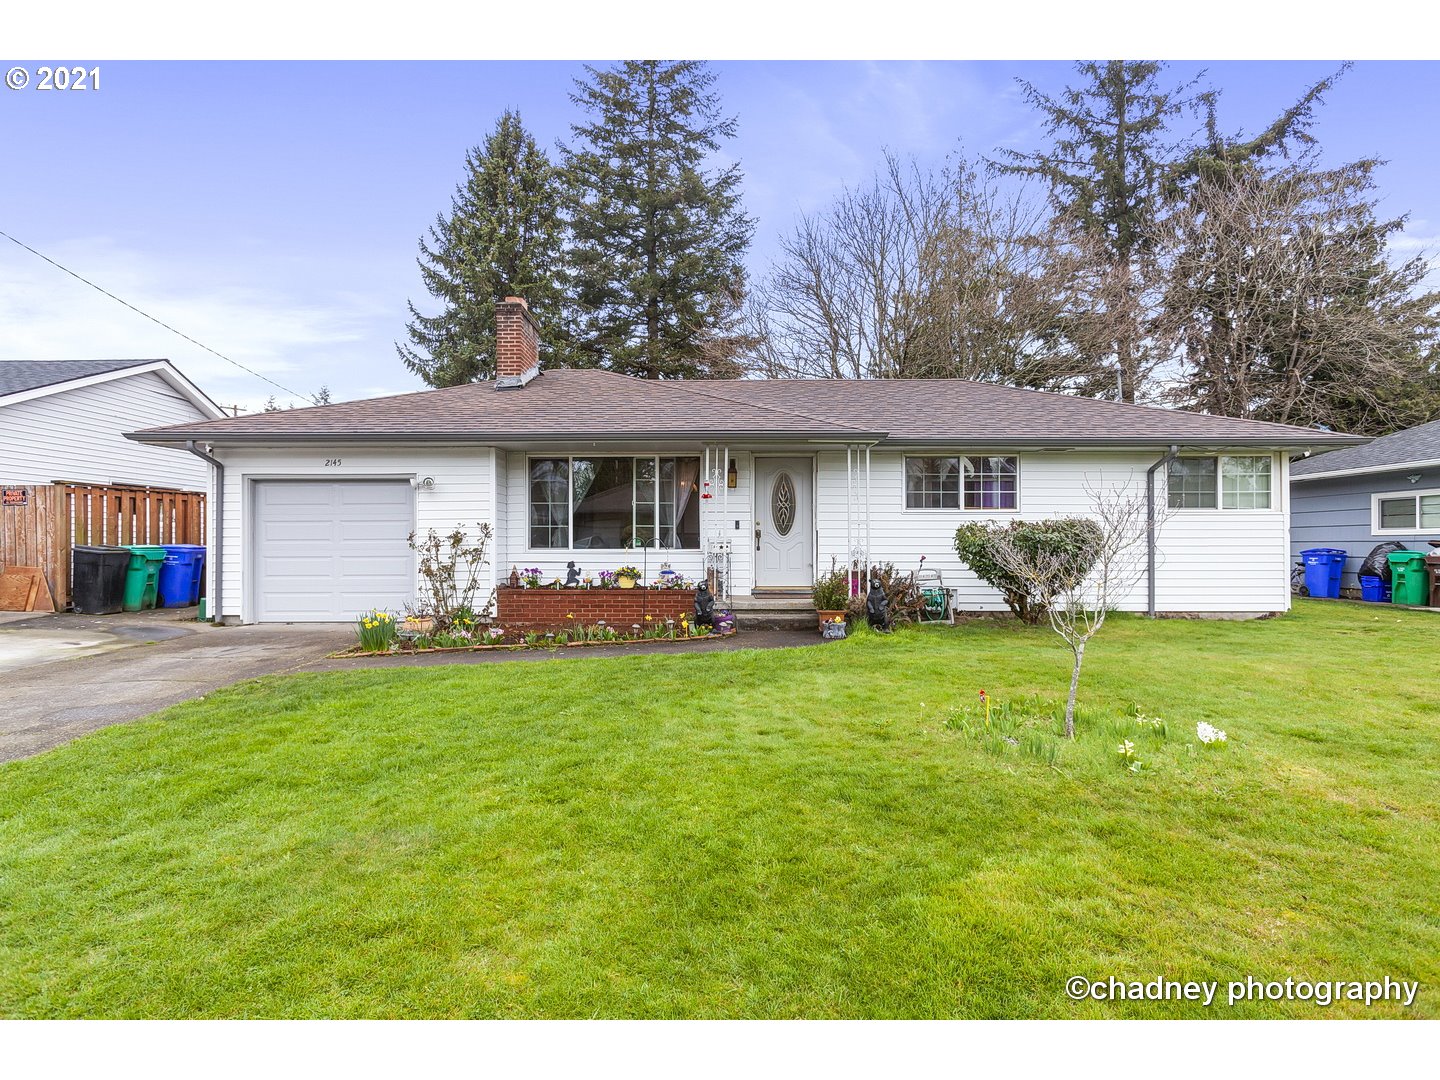 2145 SE 185TH AVE (1 of 27)